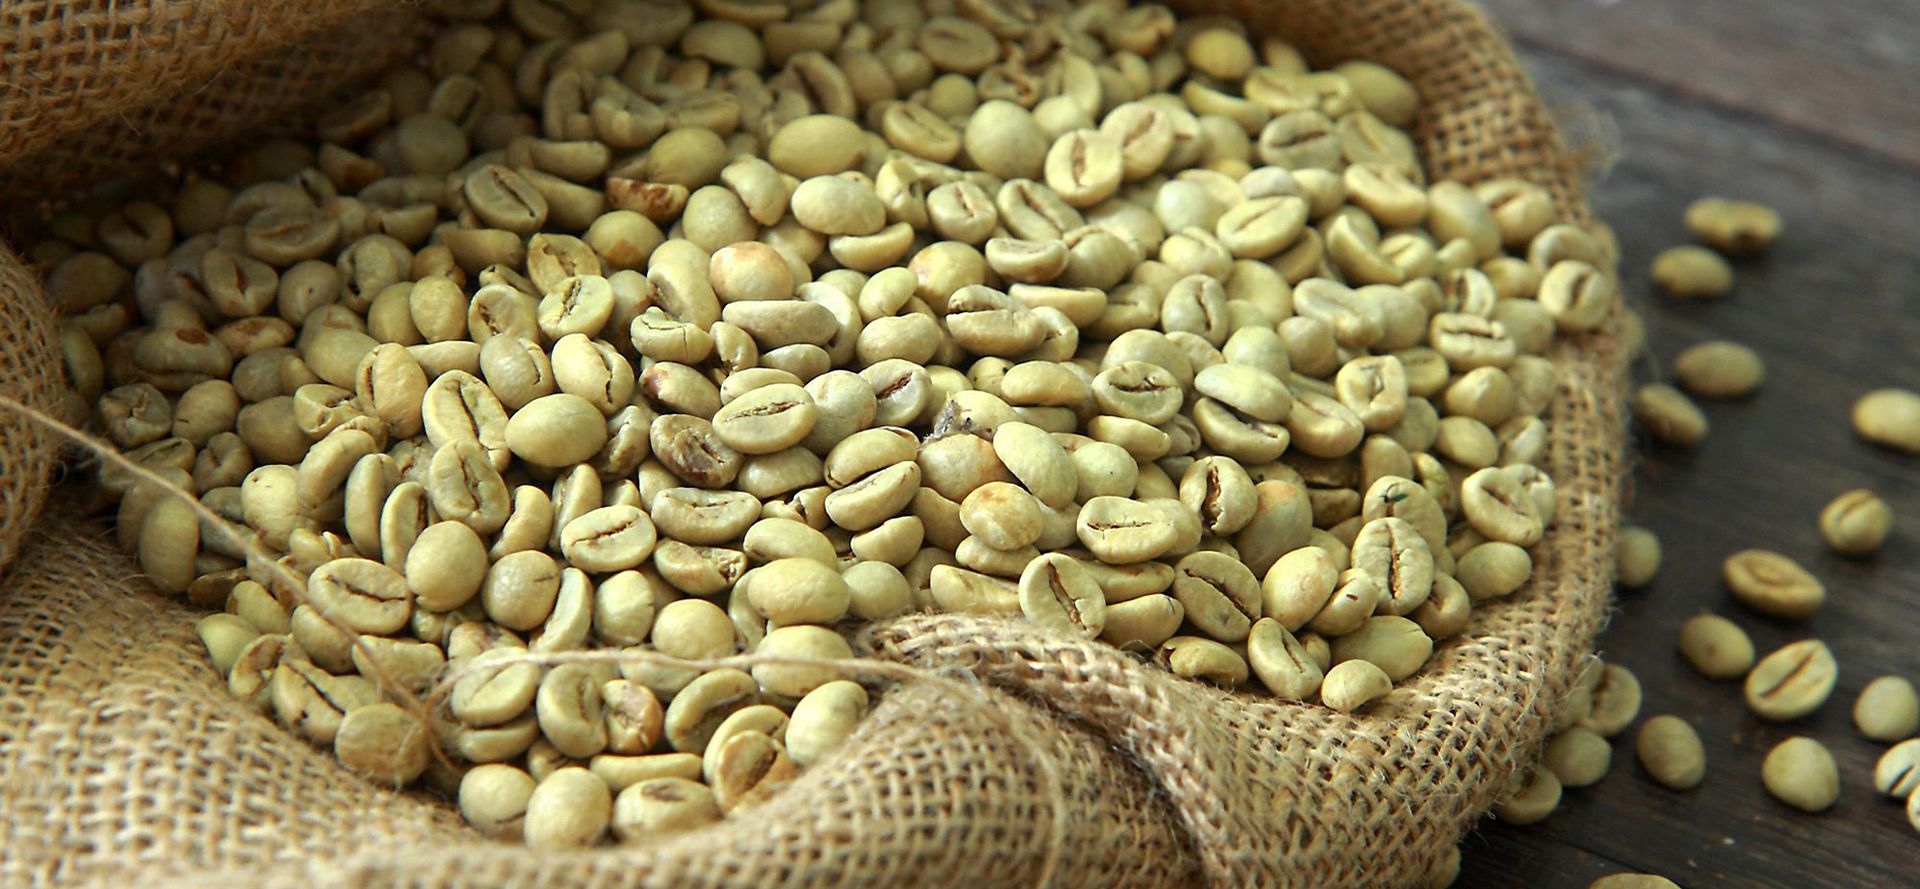 Green coffee beans in a pouch.